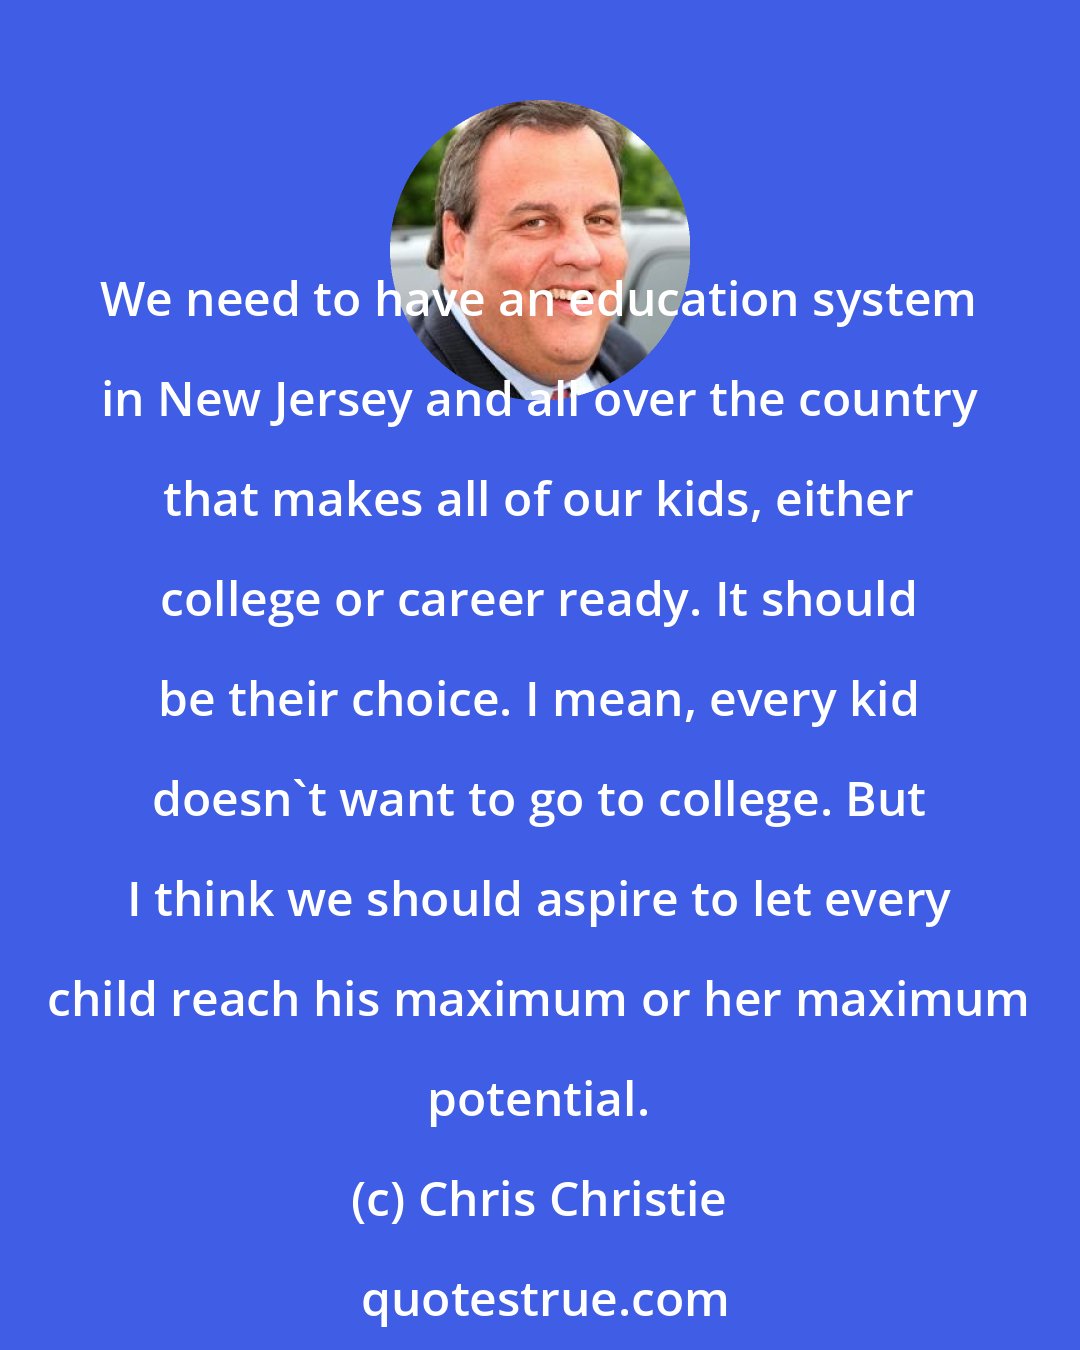 Chris Christie: We need to have an education system in New Jersey and all over the country that makes all of our kids, either college or career ready. It should be their choice. I mean, every kid doesn't want to go to college. But I think we should aspire to let every child reach his maximum or her maximum potential.